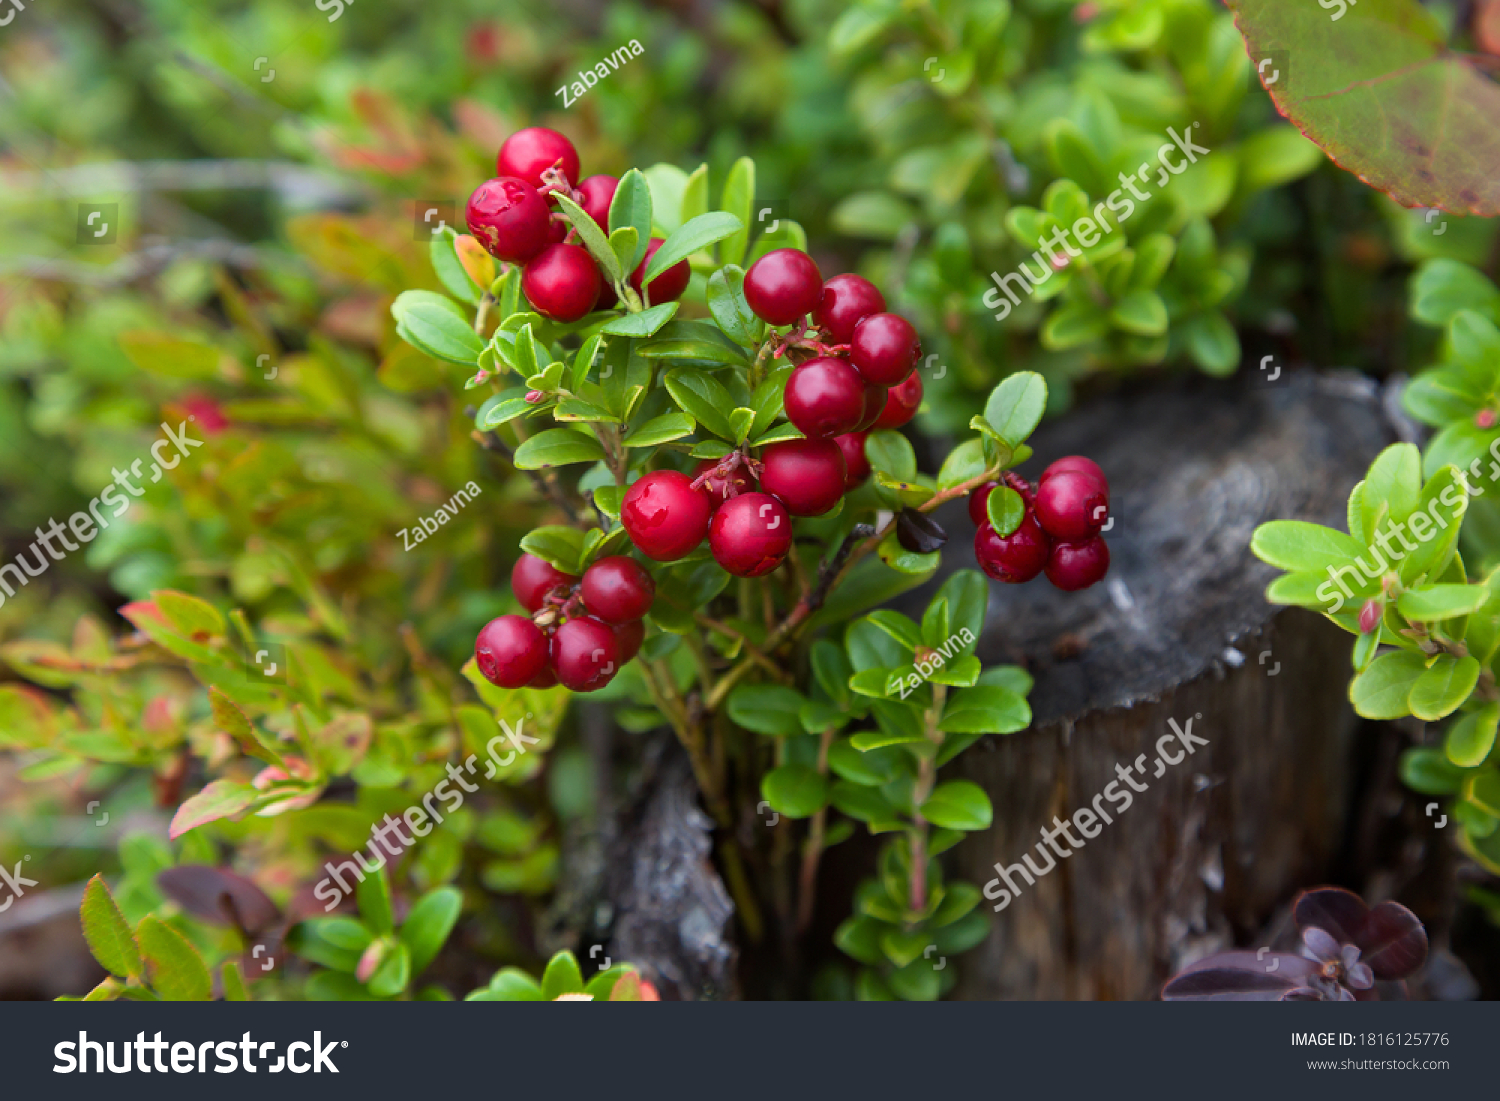 Red ripe lingonberry or cowberry on natural forest background #1816125776